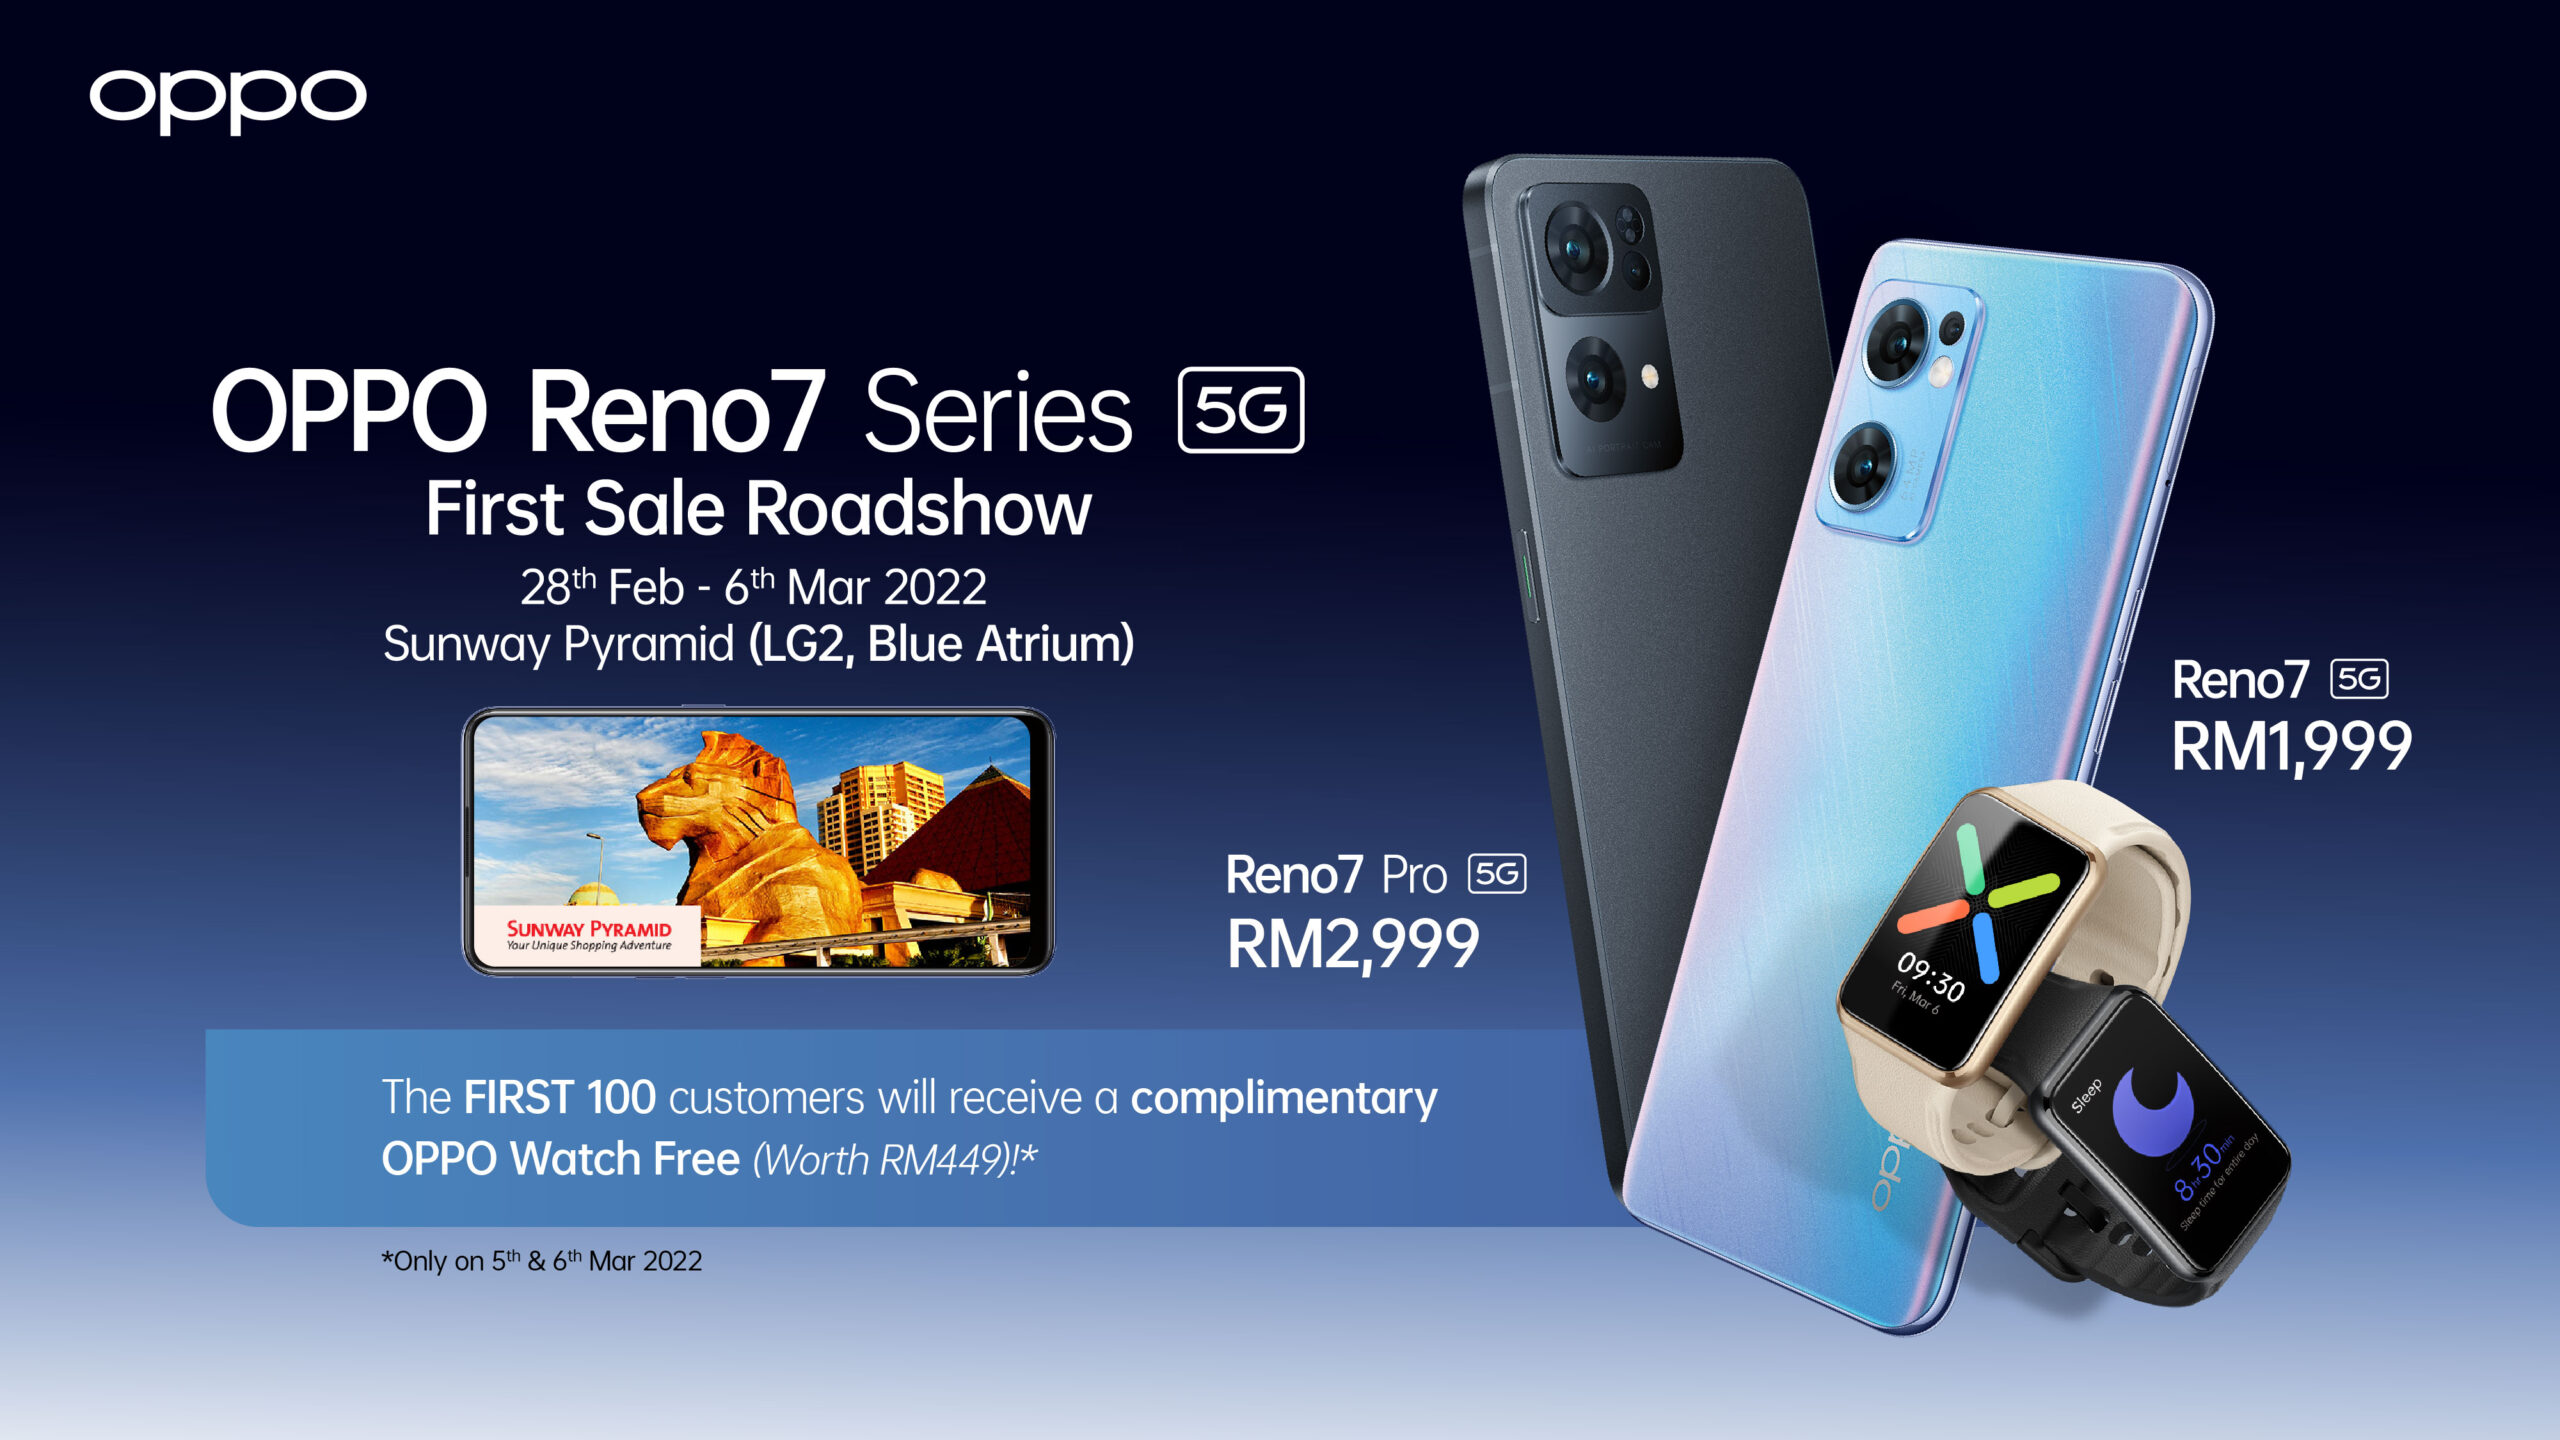 OPPO Reno7 series 5G First Sale Roadshow scaled